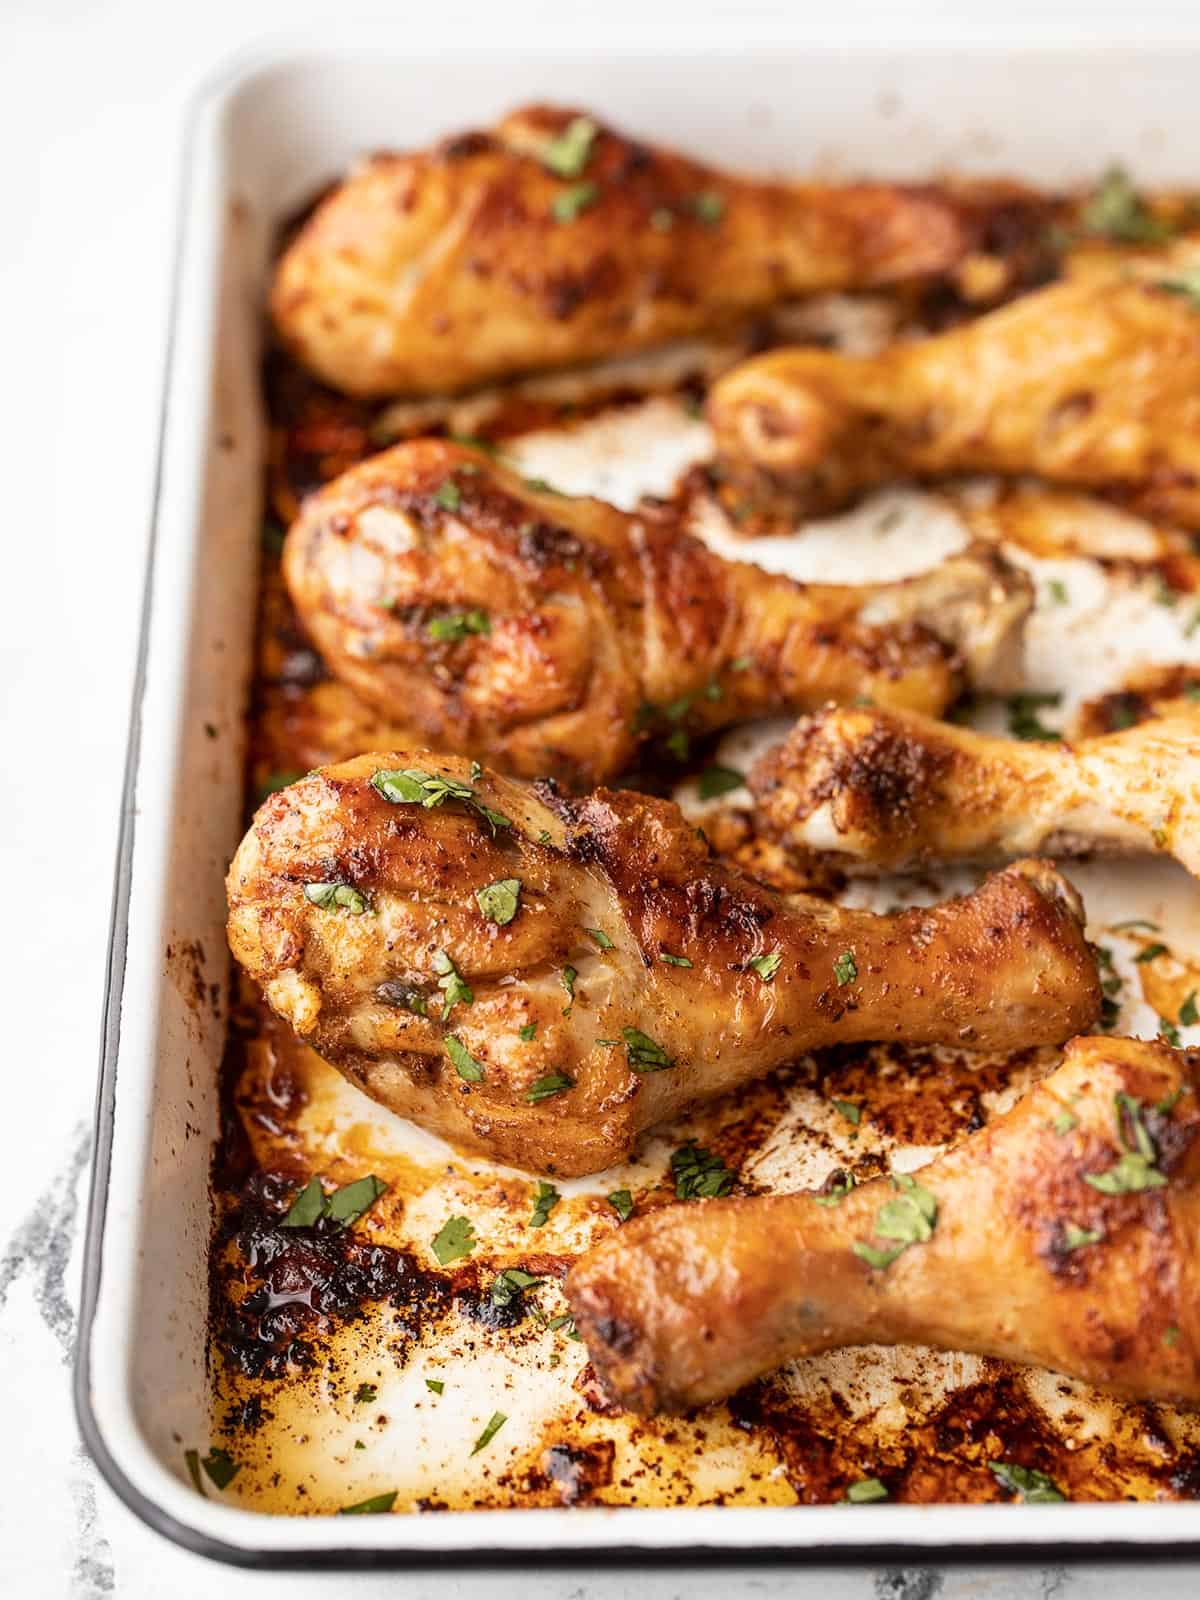 Baked Chicken Legs (Drumsticks) - Cooking Classy